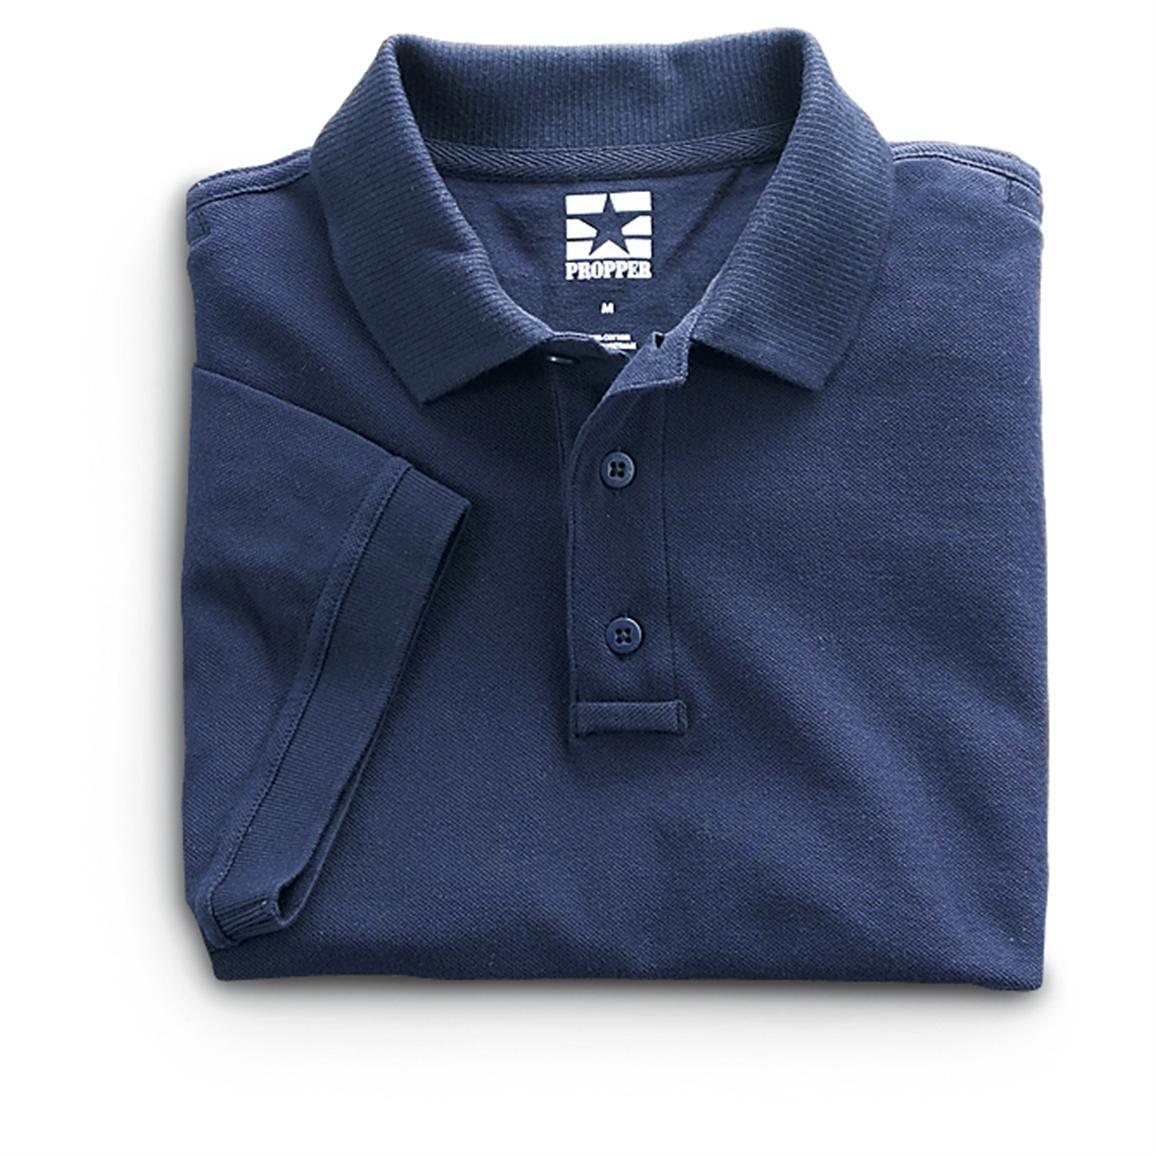 Propper® Tactical Polo Shirt - 175573, Shirts at Sportsman's Guide